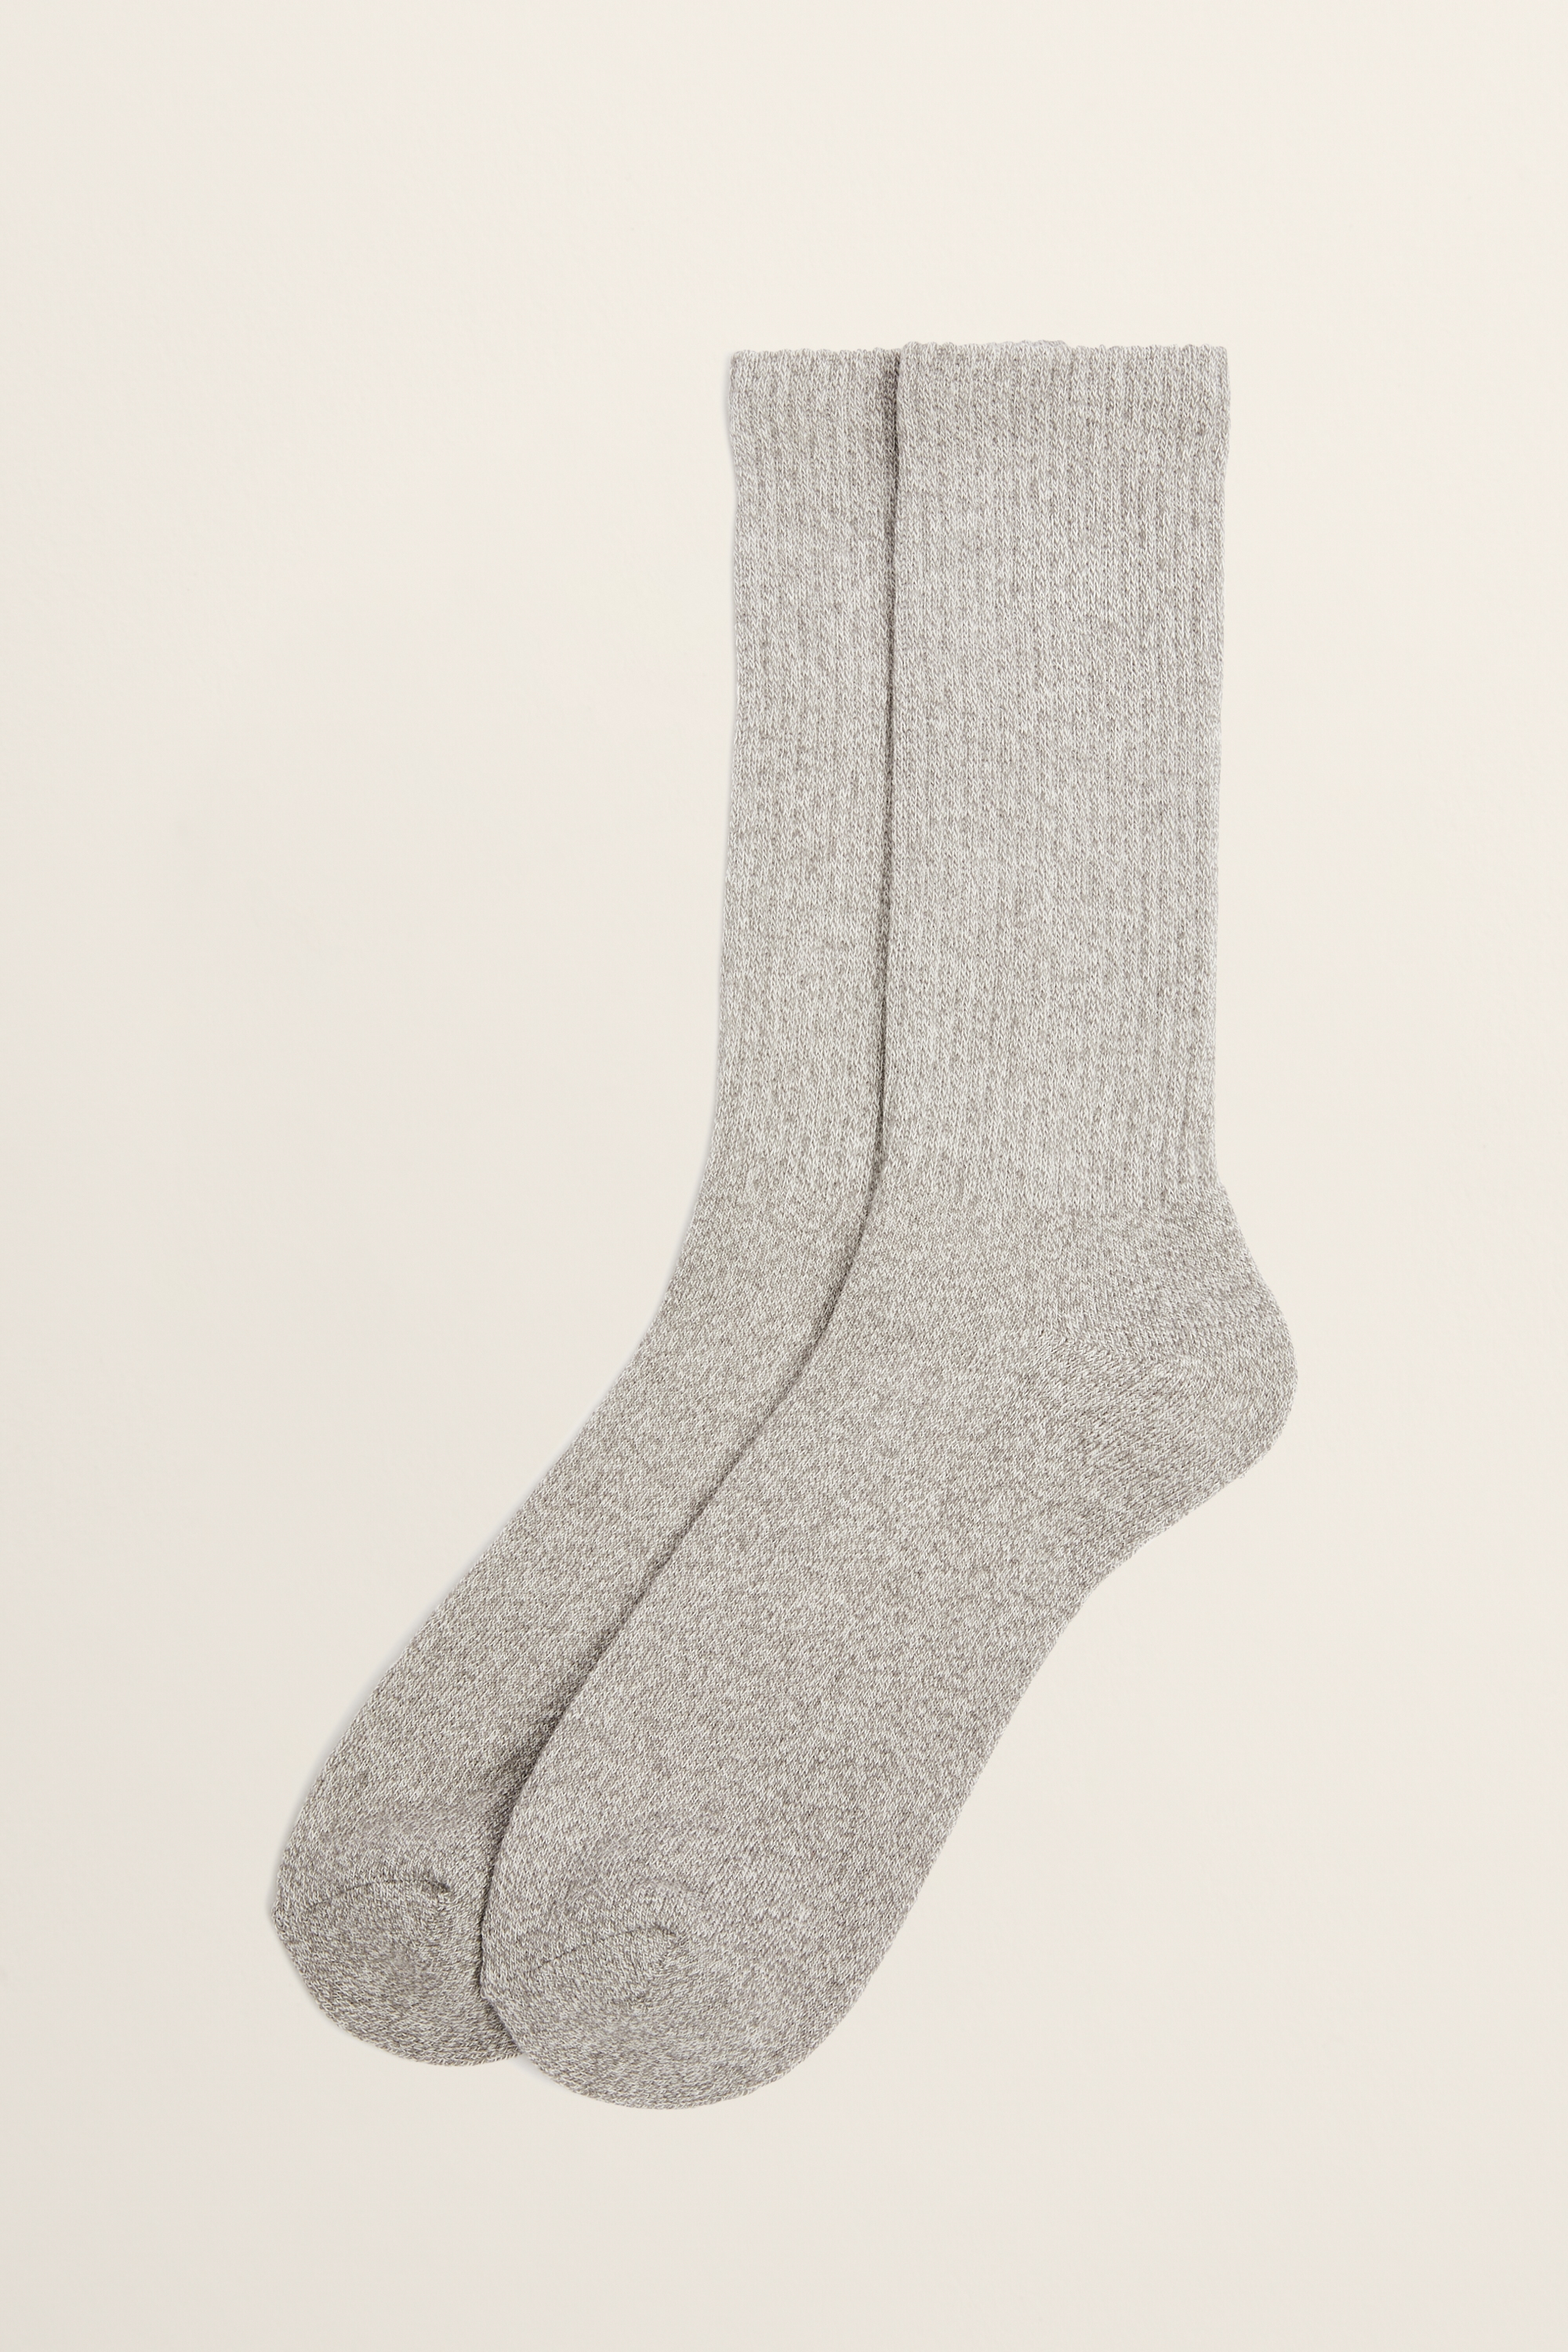 Grey Twisted Socks | Buy Online at Moss